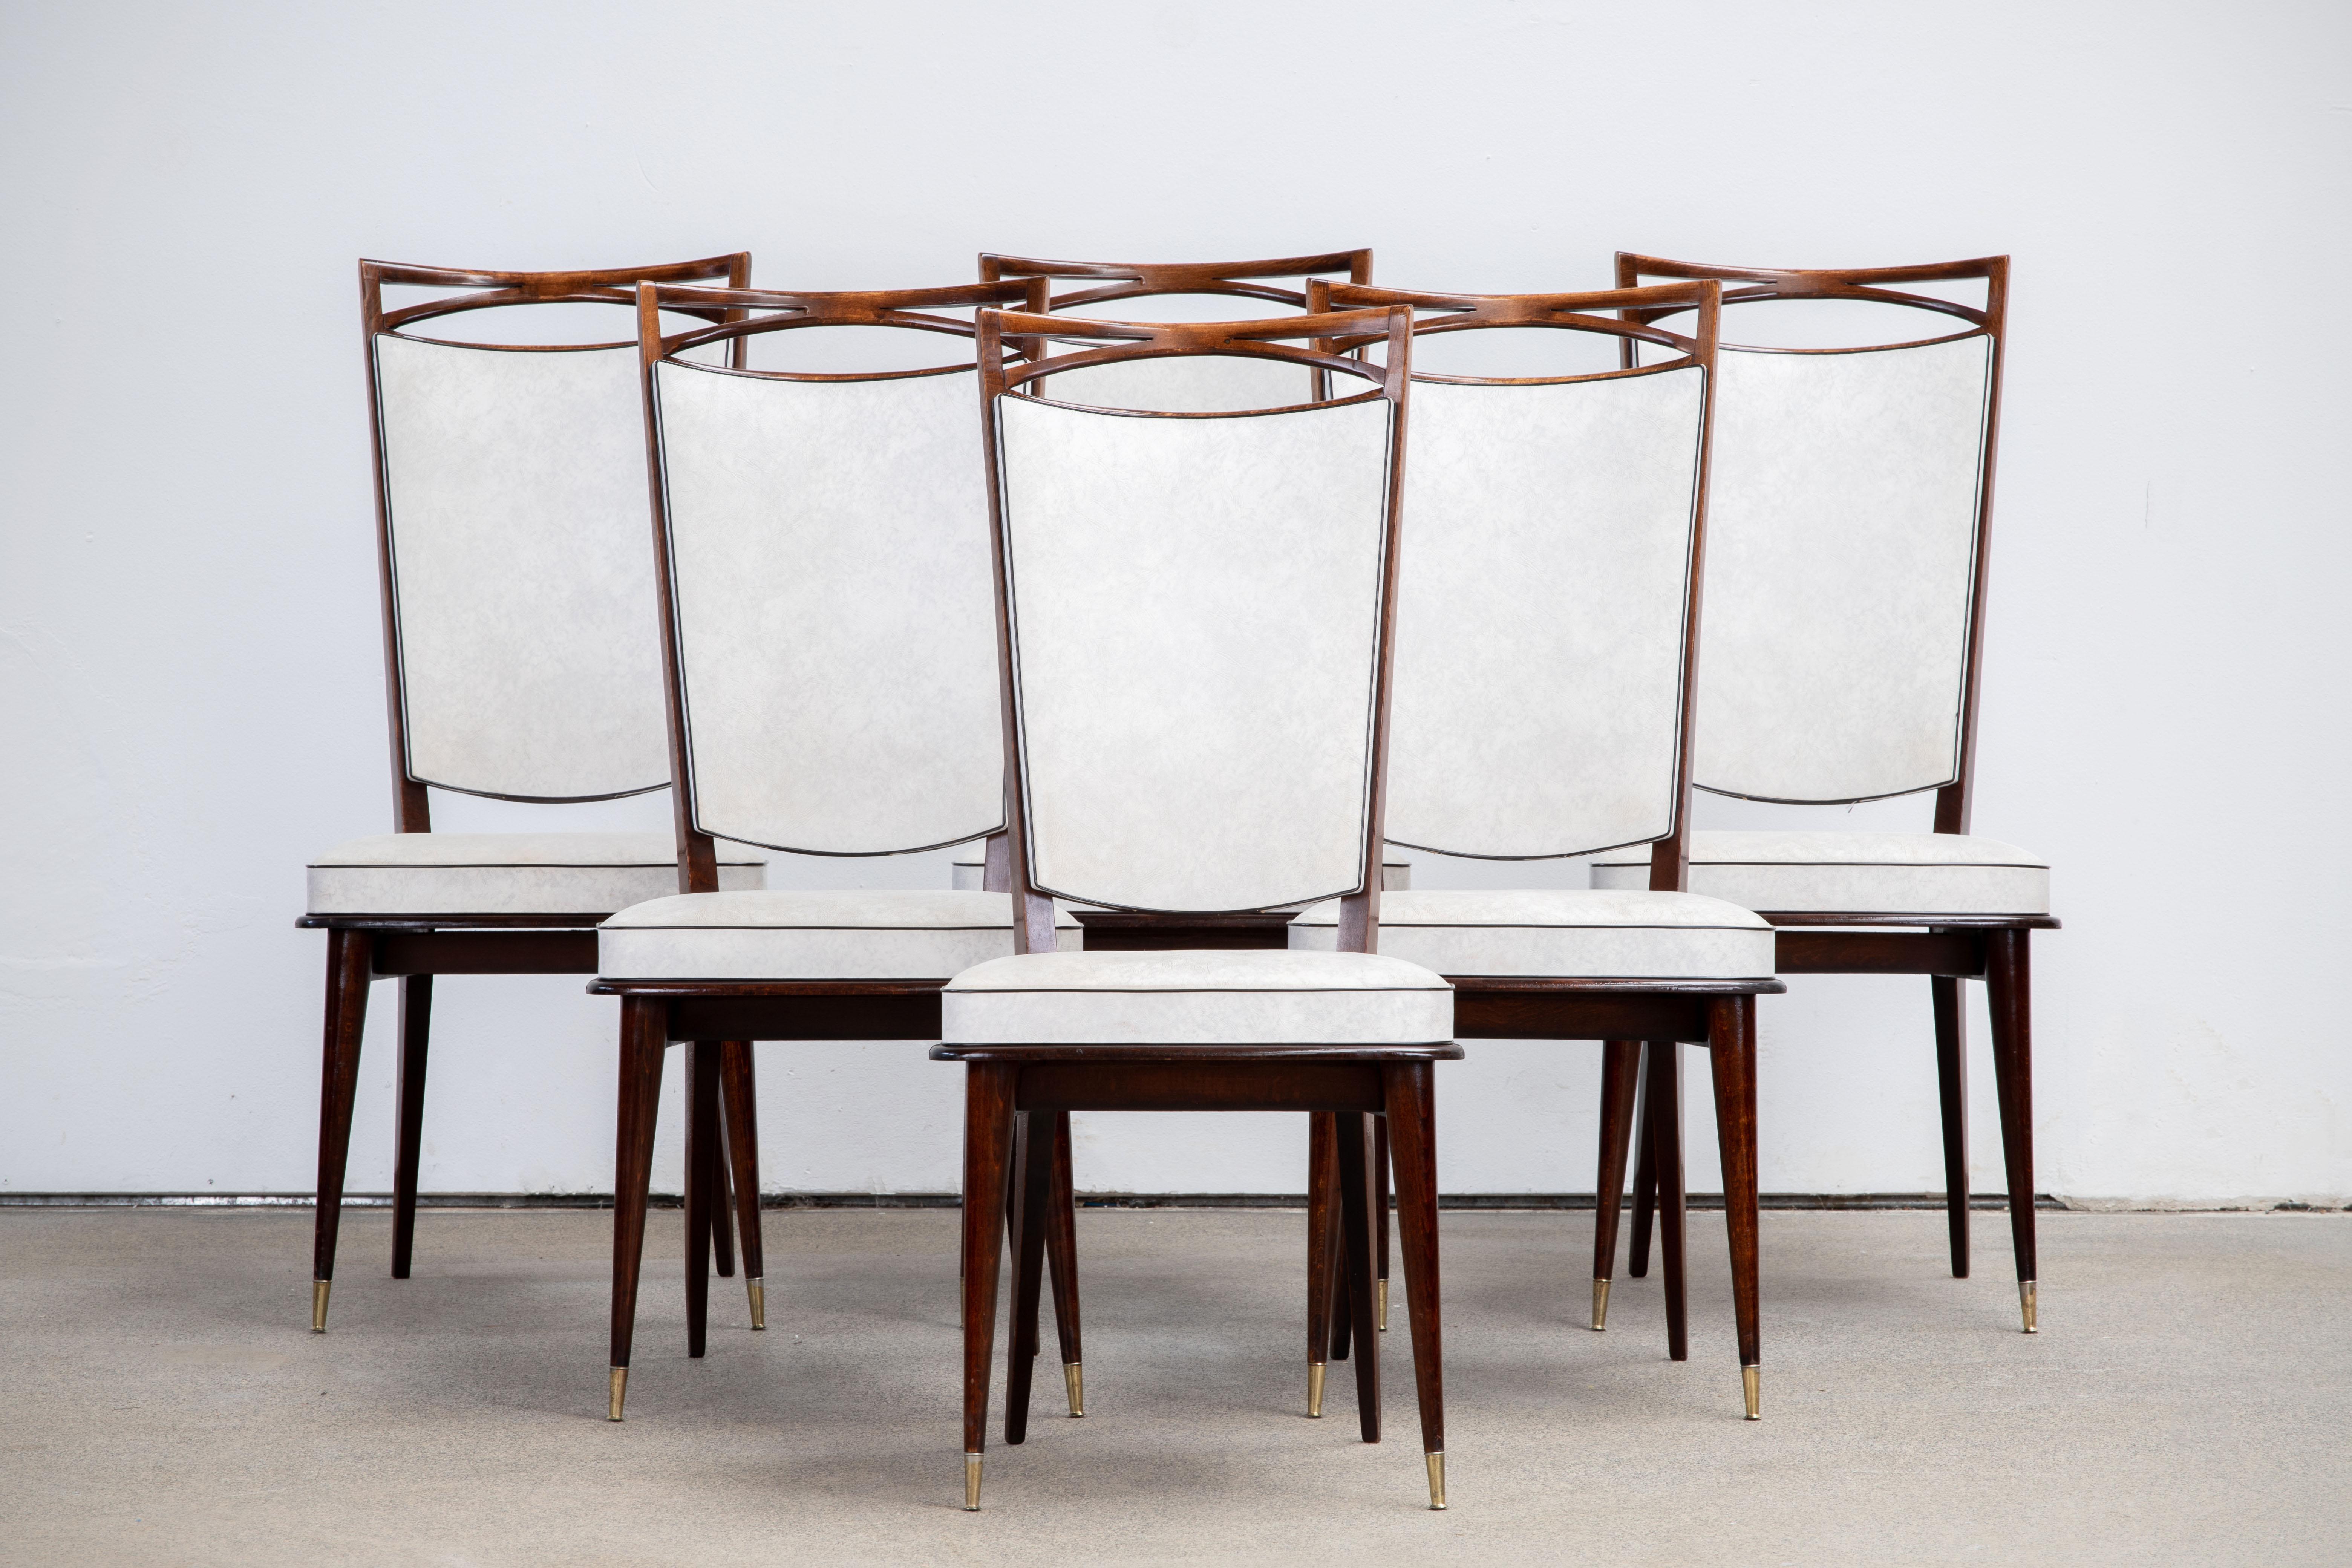 French Art Deco Set of 6 Chairs, France, 1940 For Sale